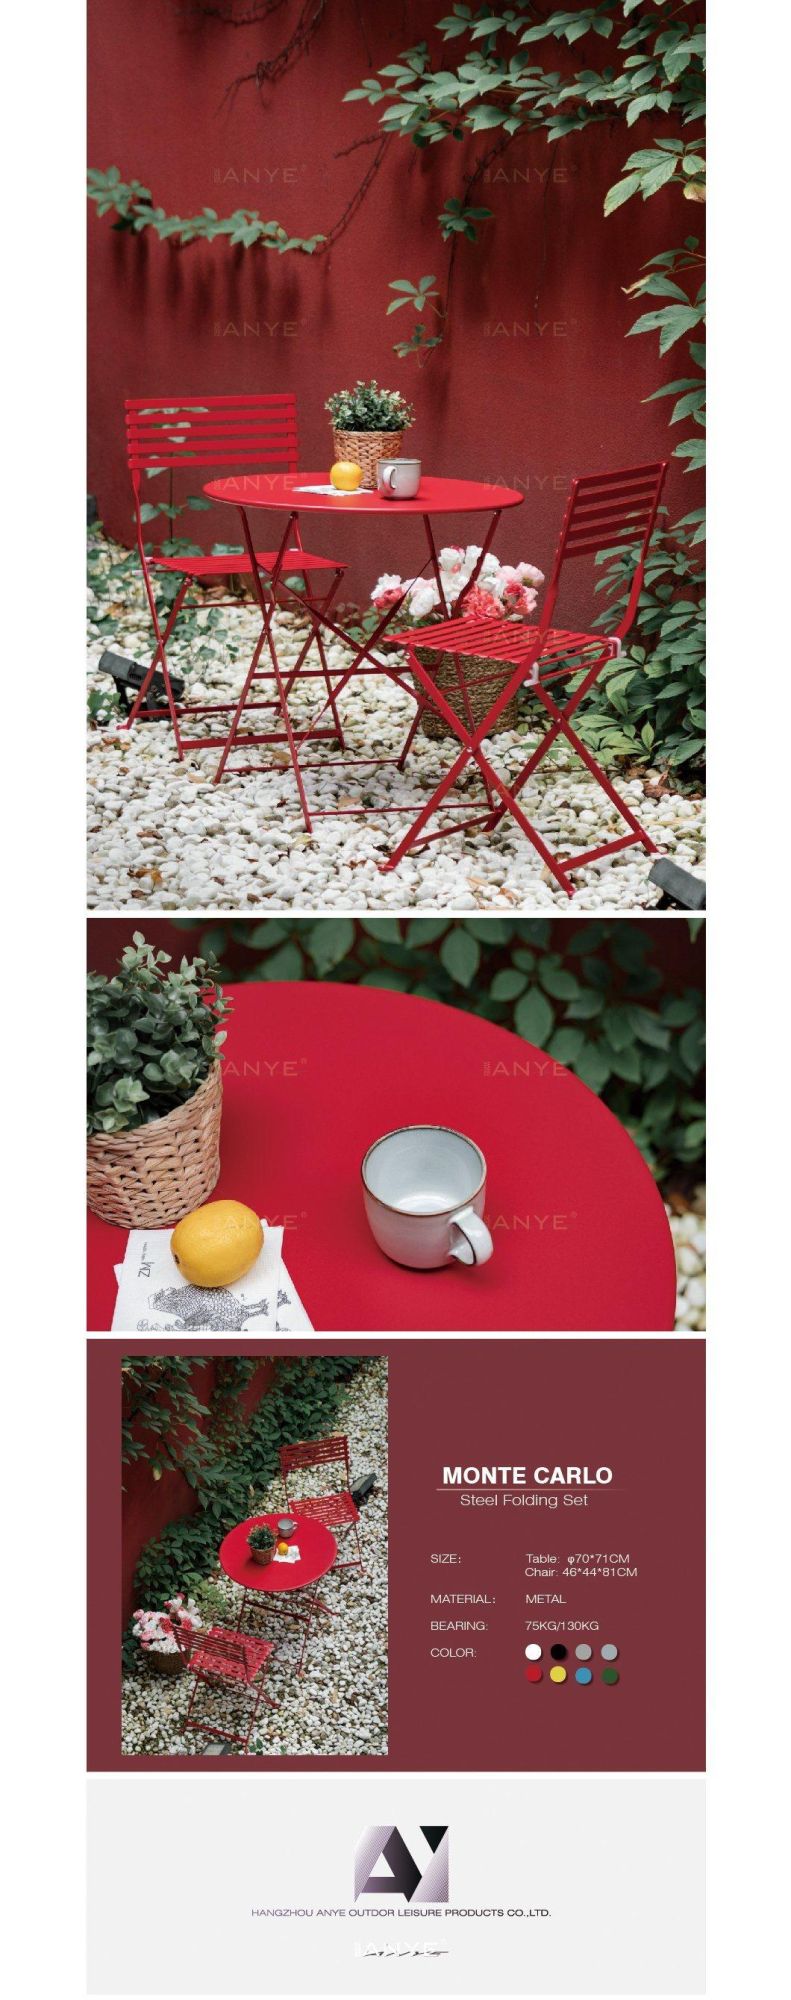 Patio Furniture Set Outdoor Steel Folding Dining Furniture Table and Chair European Style Dining Furniture